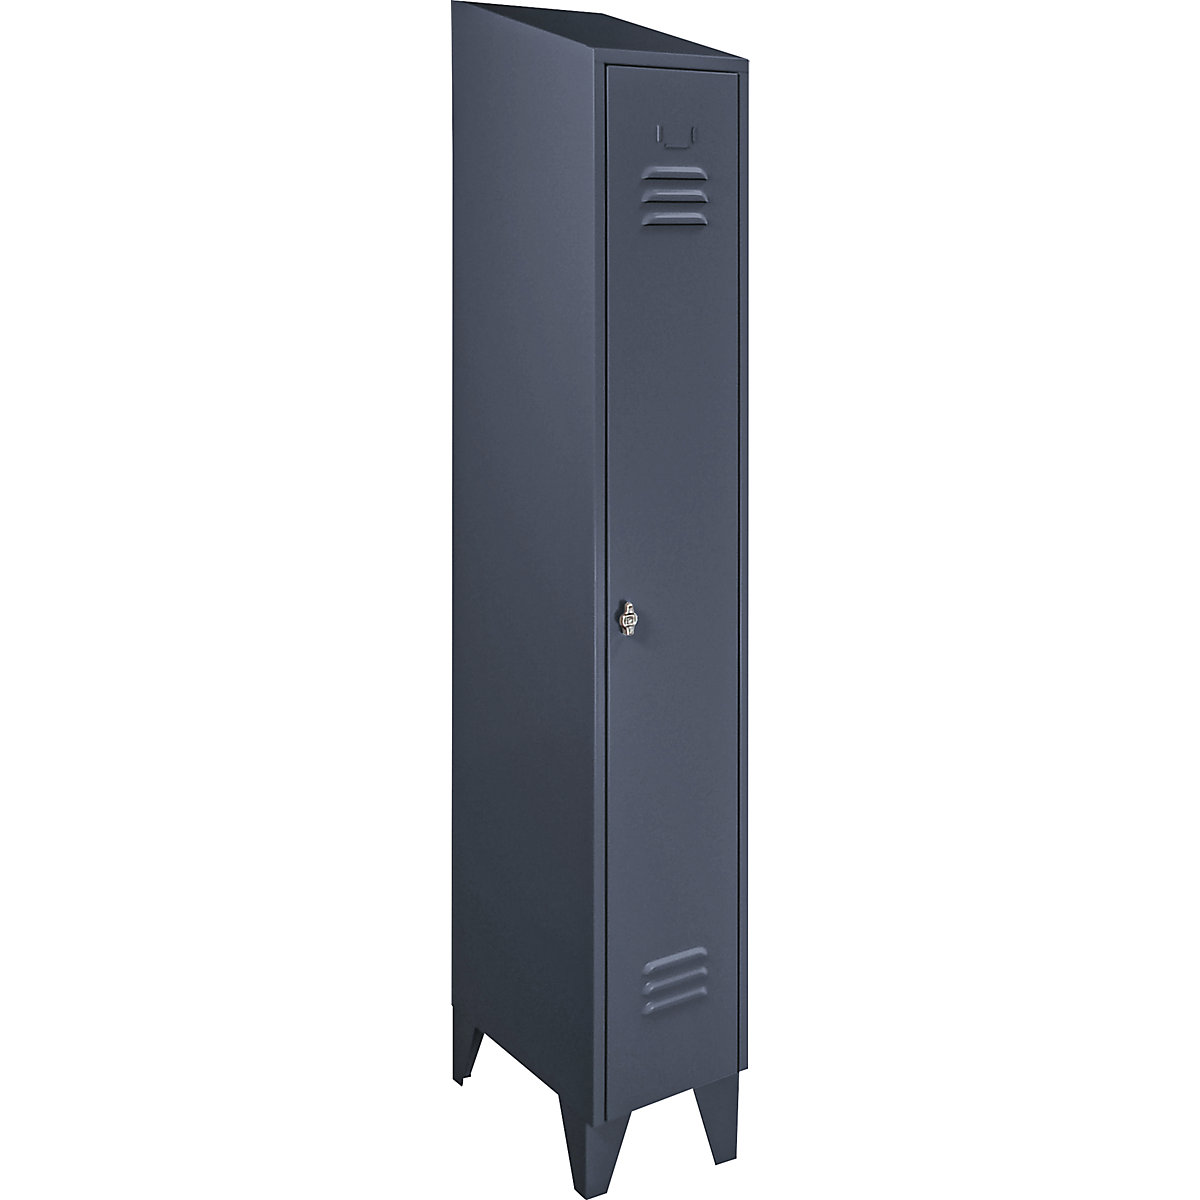 Steel cupboard with sloping top, full height compartments - Wolf